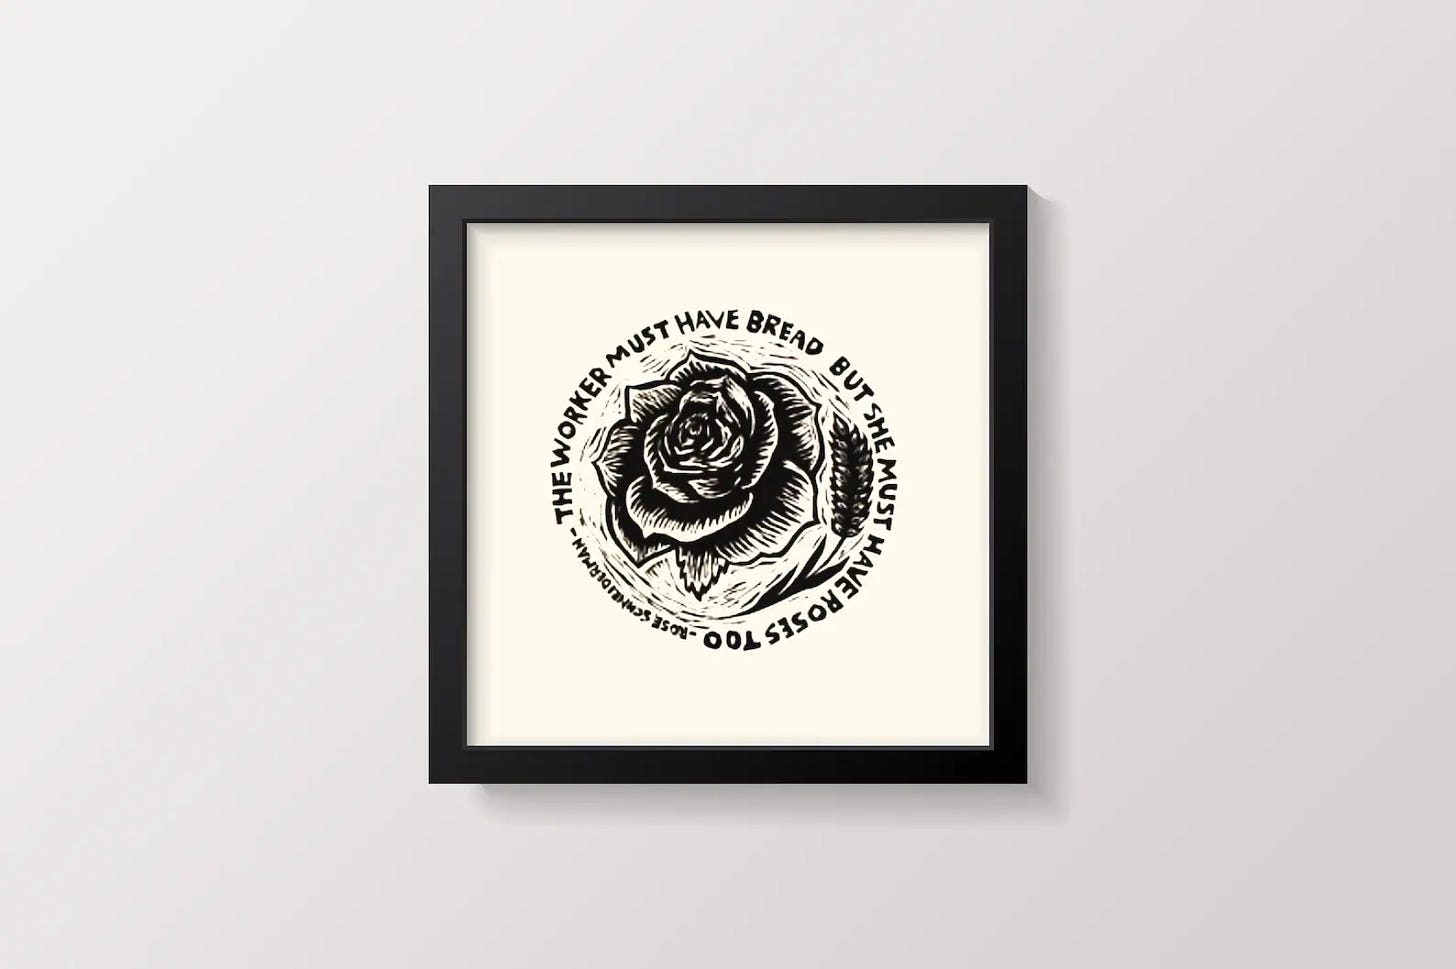 Linocut print in a frame with an image of a rose and a wheat grain that says "The worker must have bread but she must have roses too. -- Rose Schneiderman"